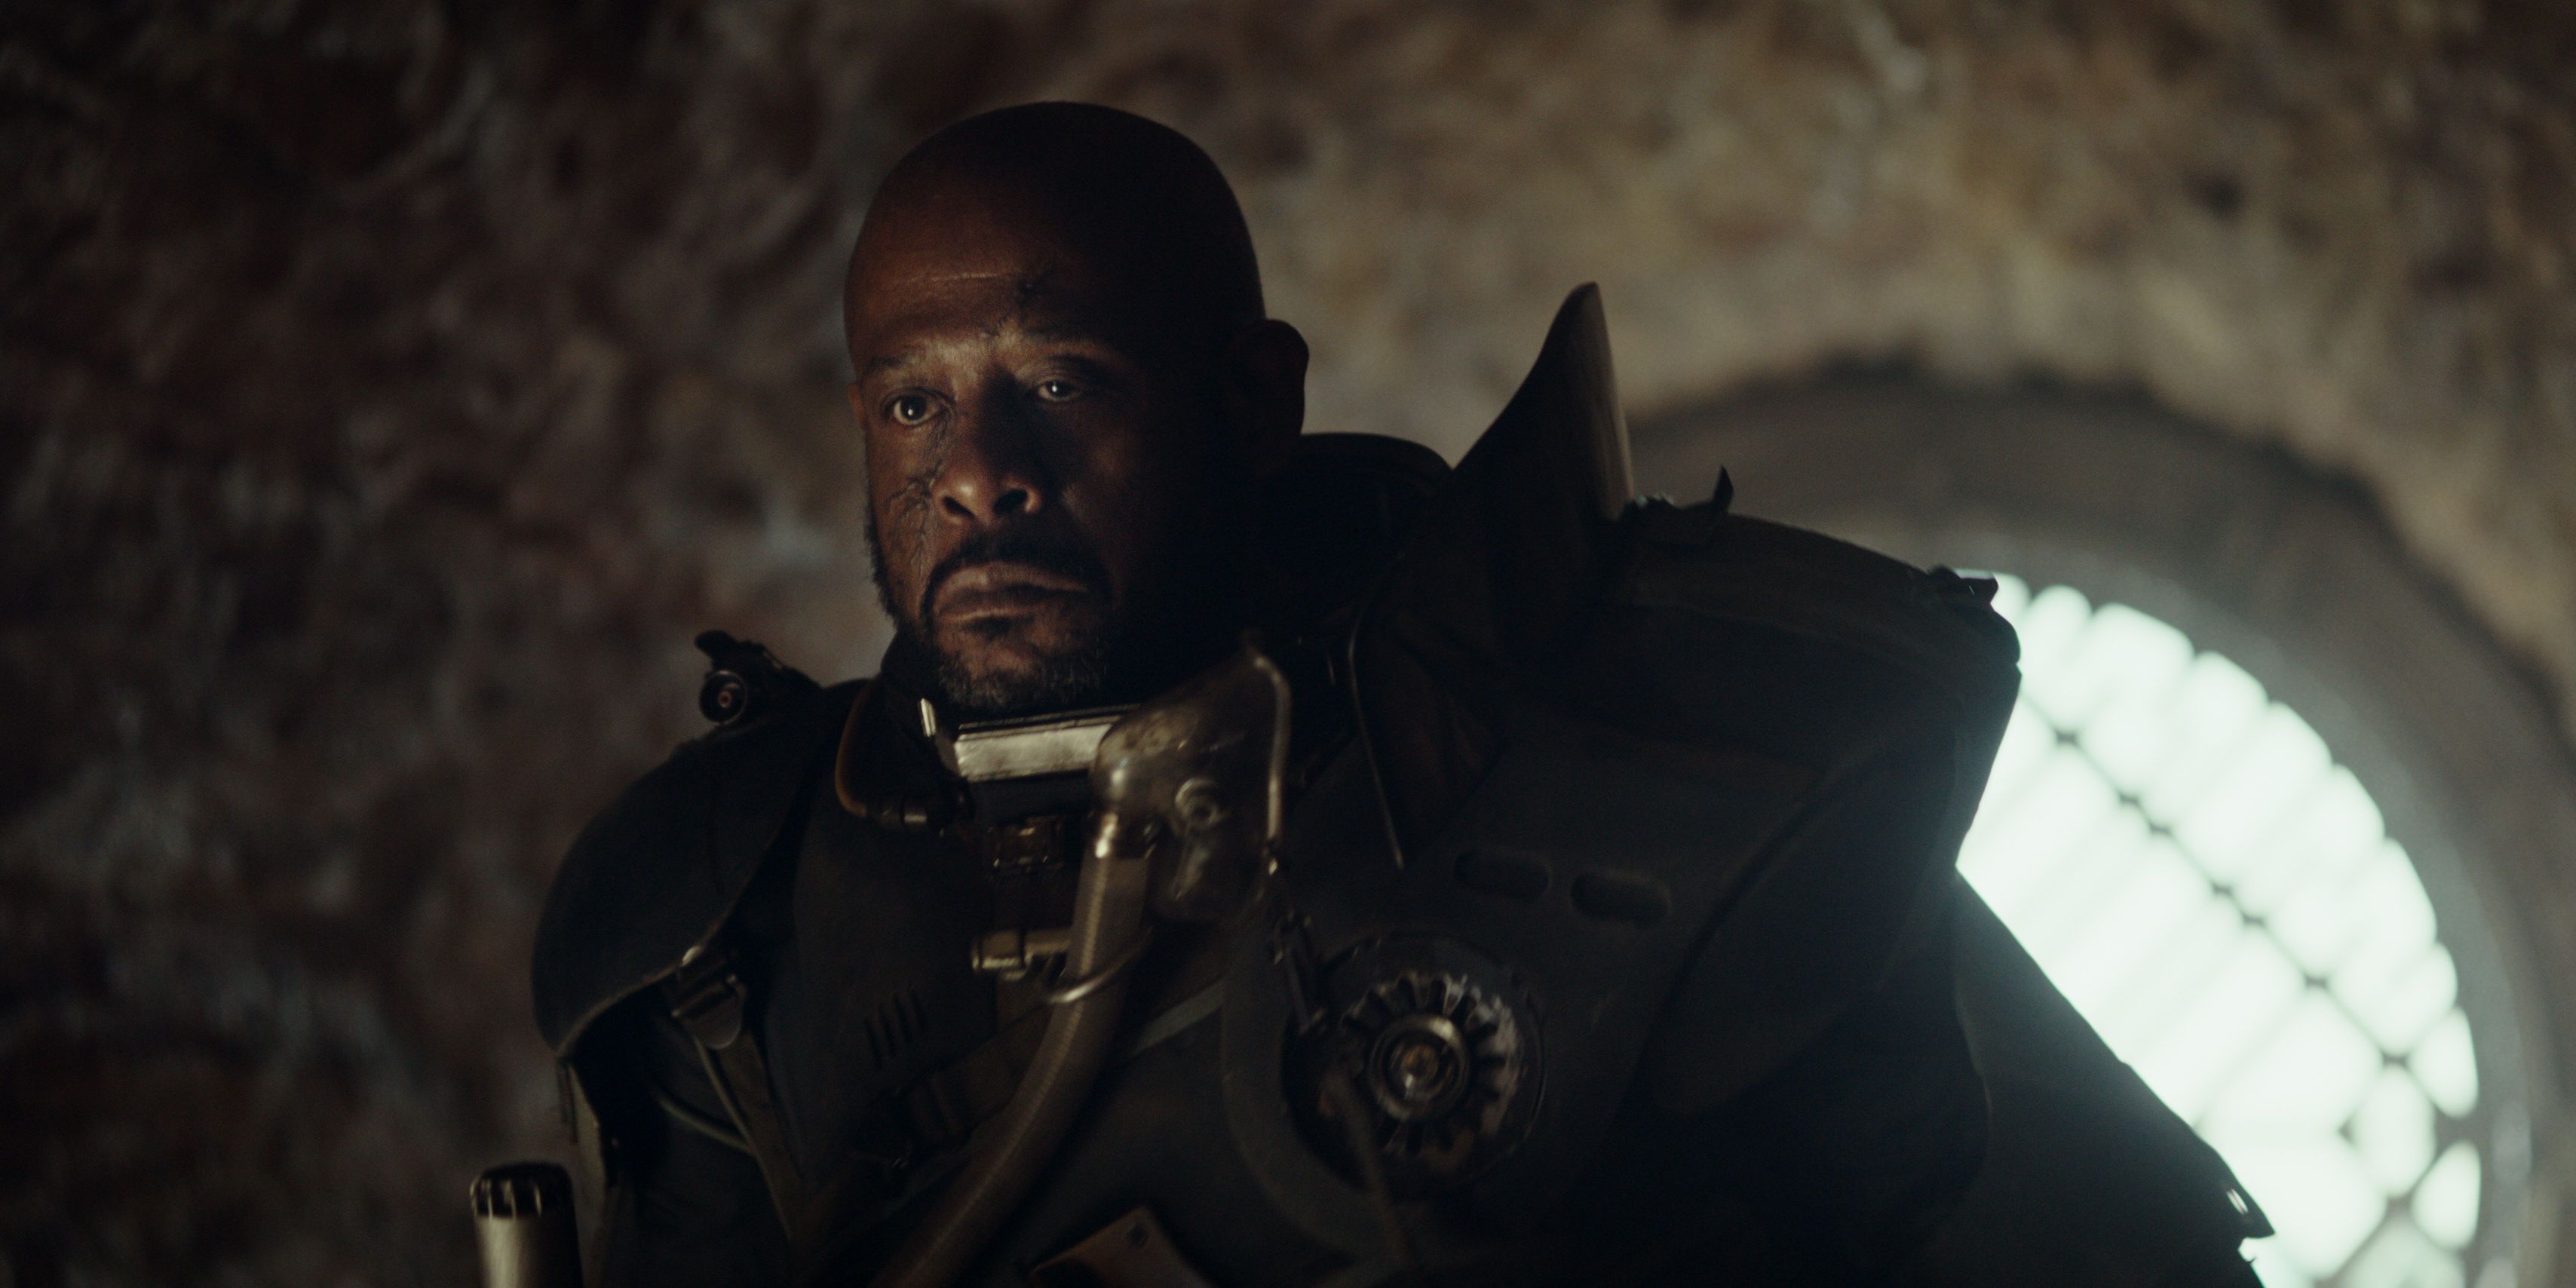 Rogue One Forest Whitaker